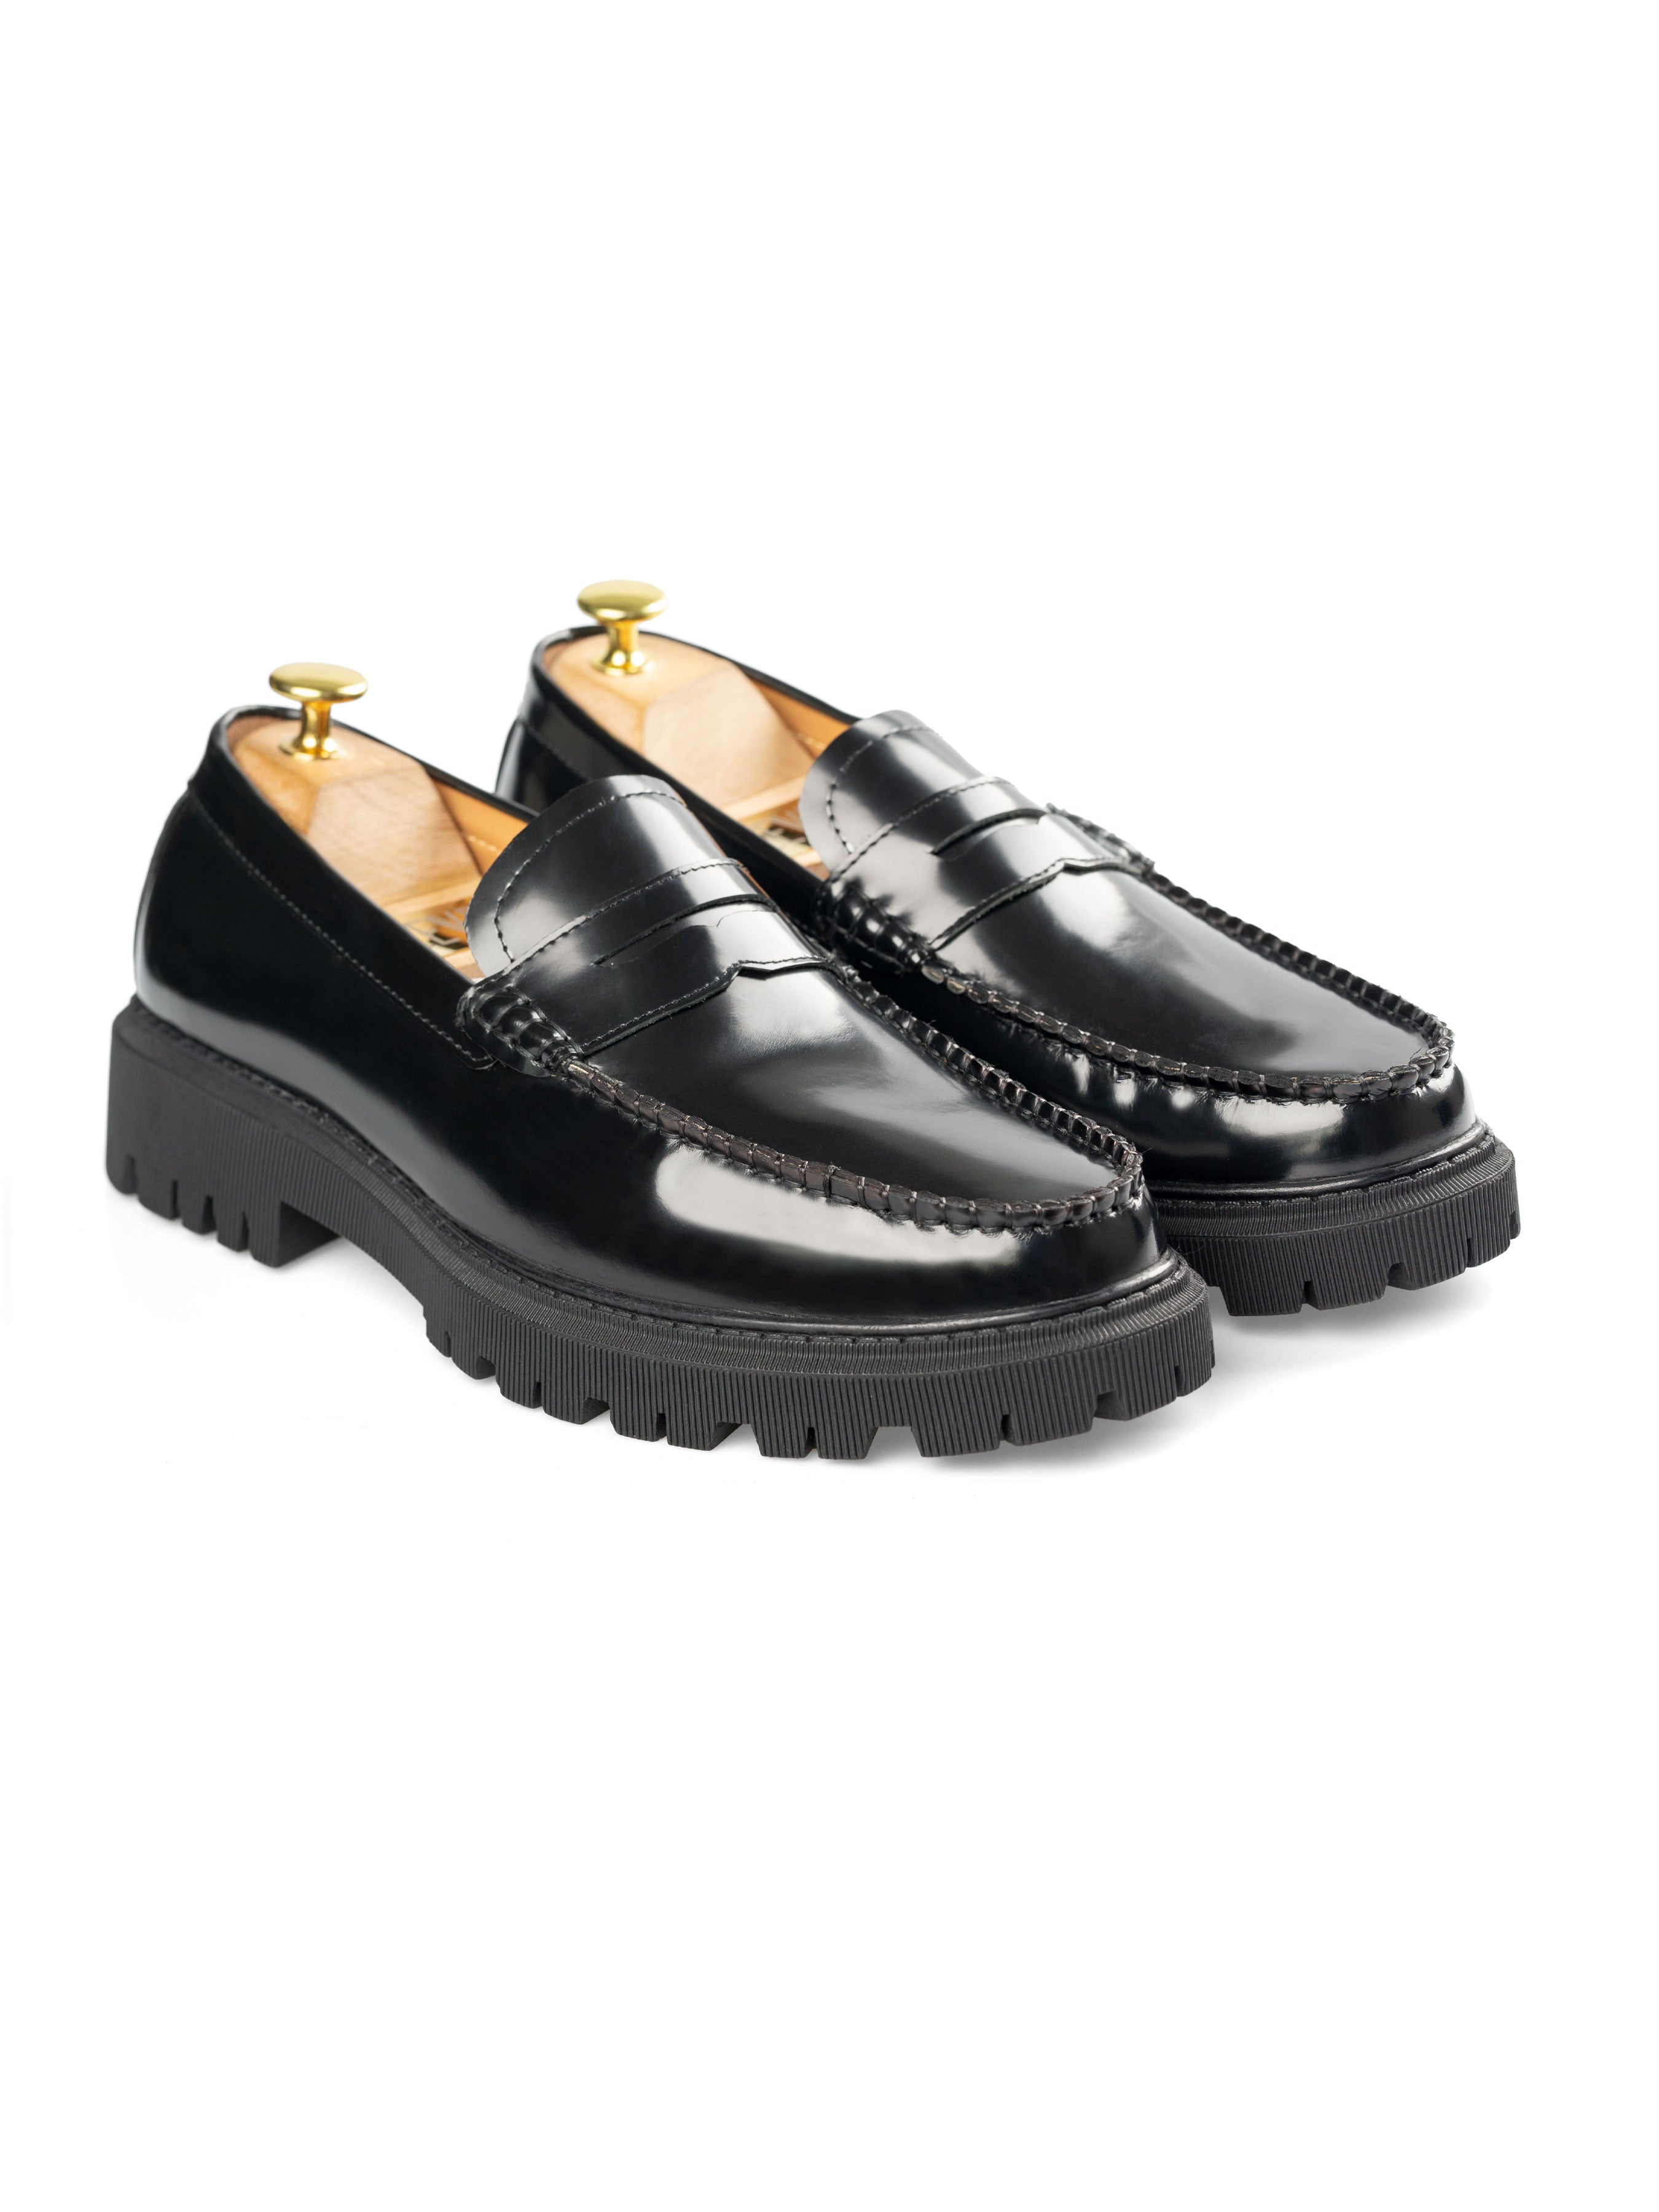 Penny Loafer - Black Polished Leather (Chunky Sole) - Zeve Shoes